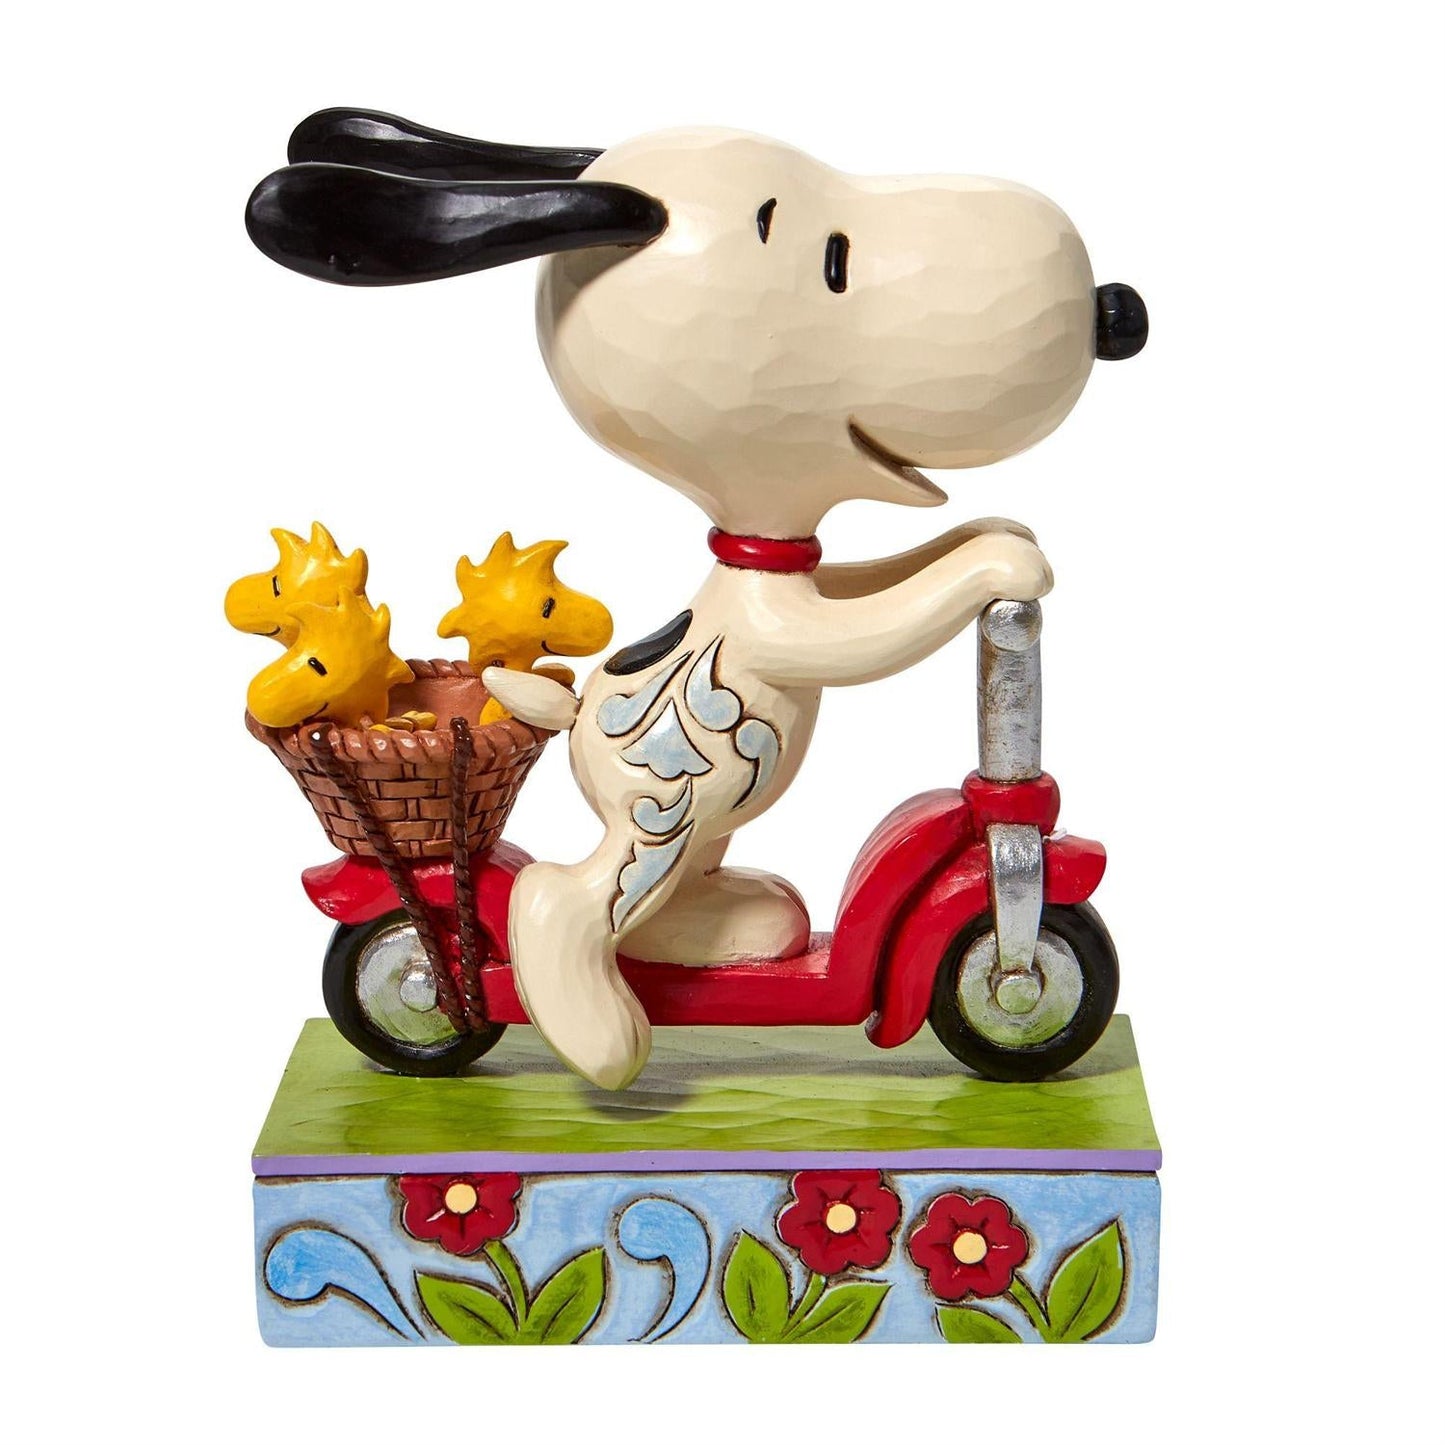 Peanuts by Jim Shore Snoopy Riding Scooter Figurine